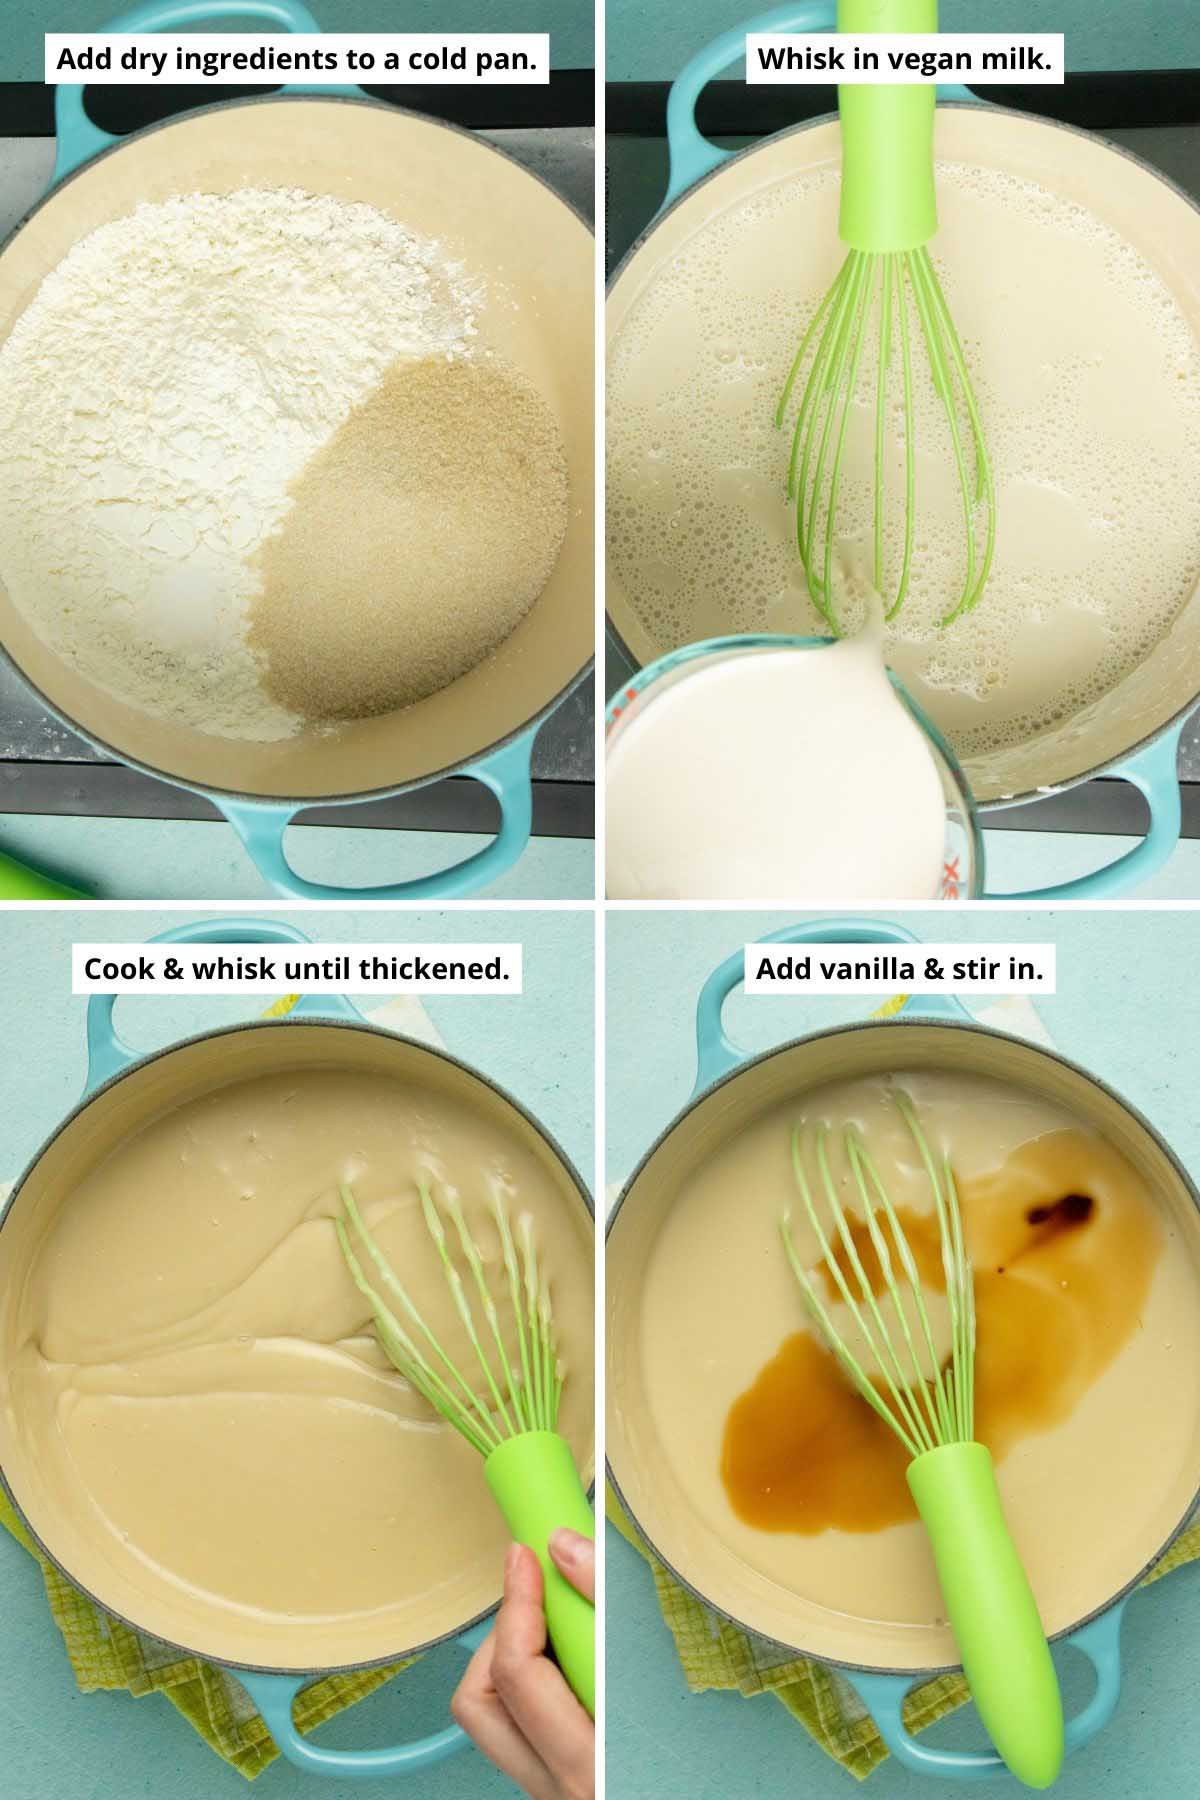 image collage showing the dry ingredients in the cold pan, adding the oat milk, the pudding when it's thickened, and adding the vanilla to the pudding mixture